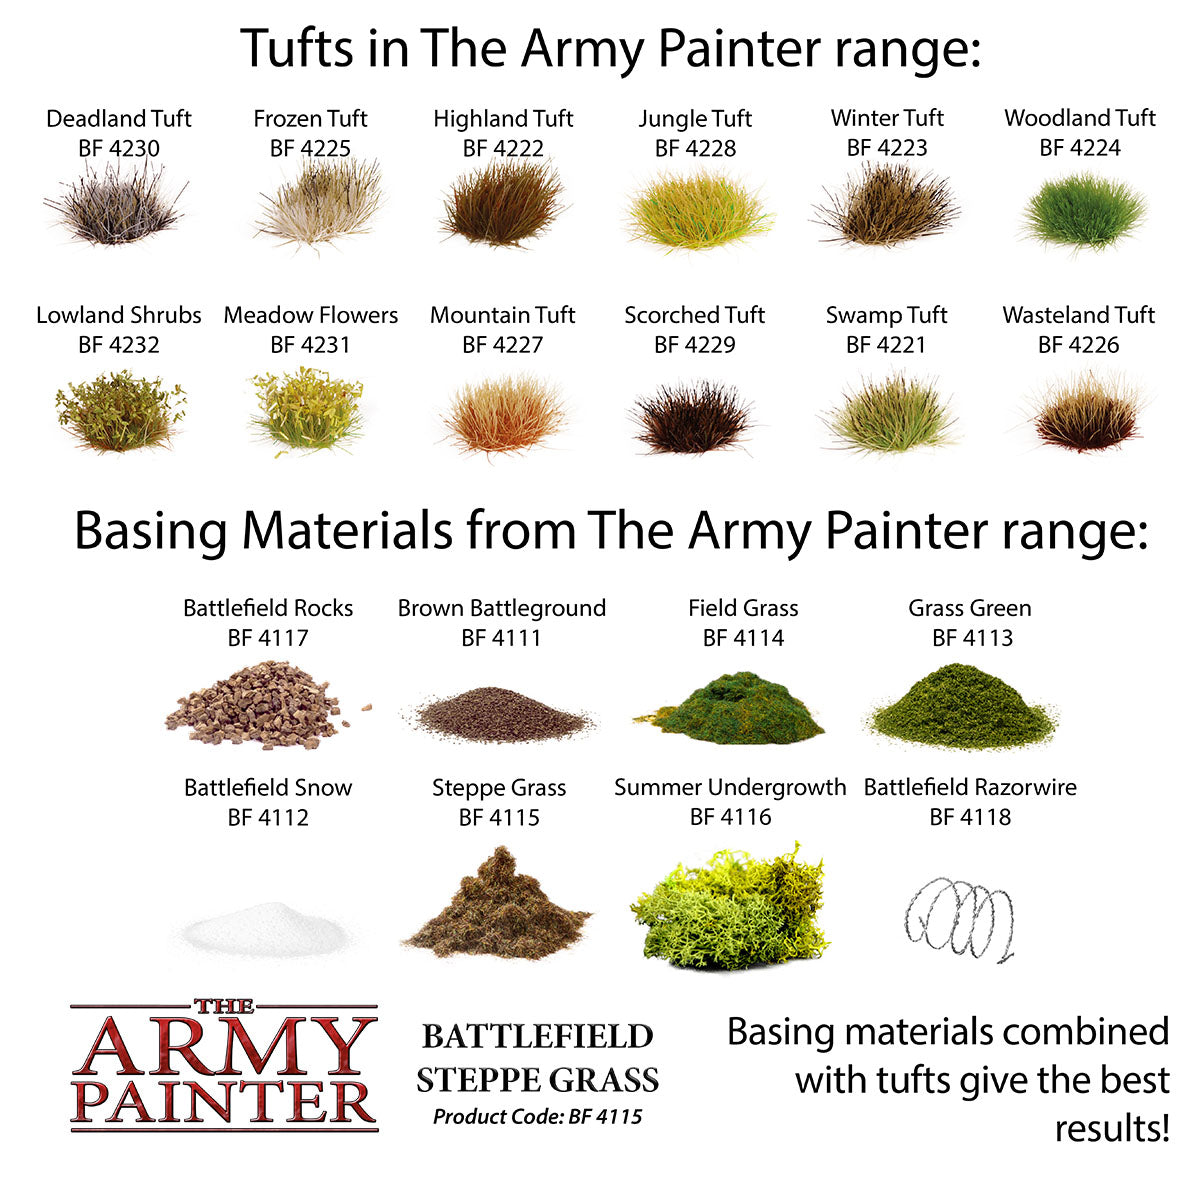 The Army Painter - Battlefield Steppe Grass BF4115